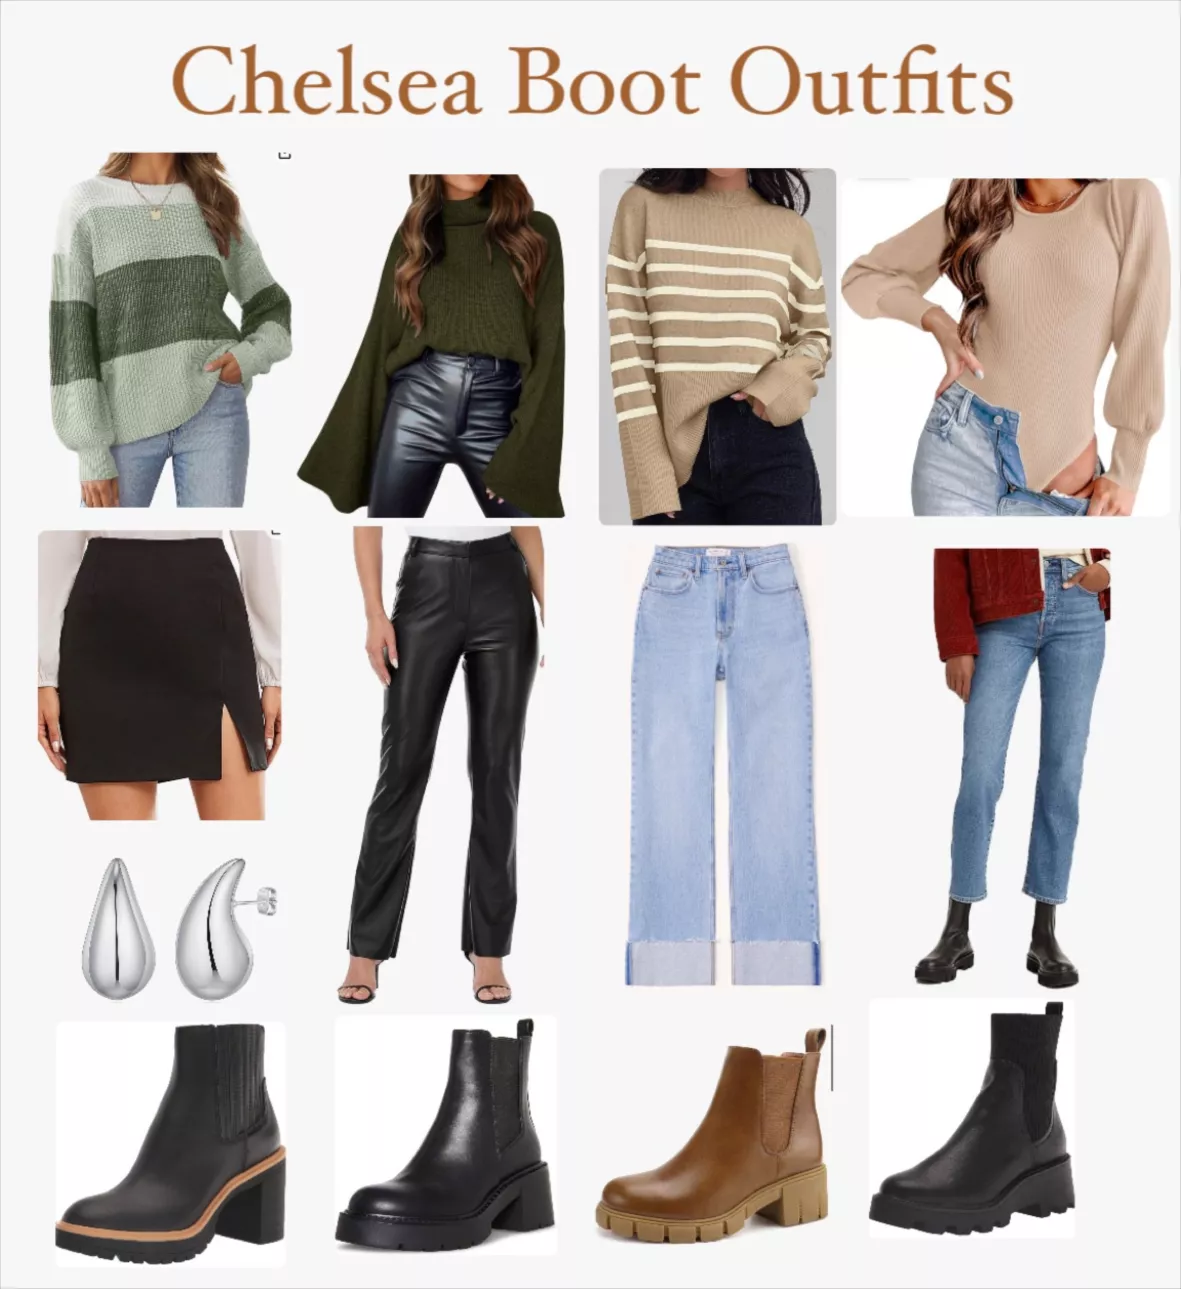 Leather Chelsea Boots - Cute Boots for Winter